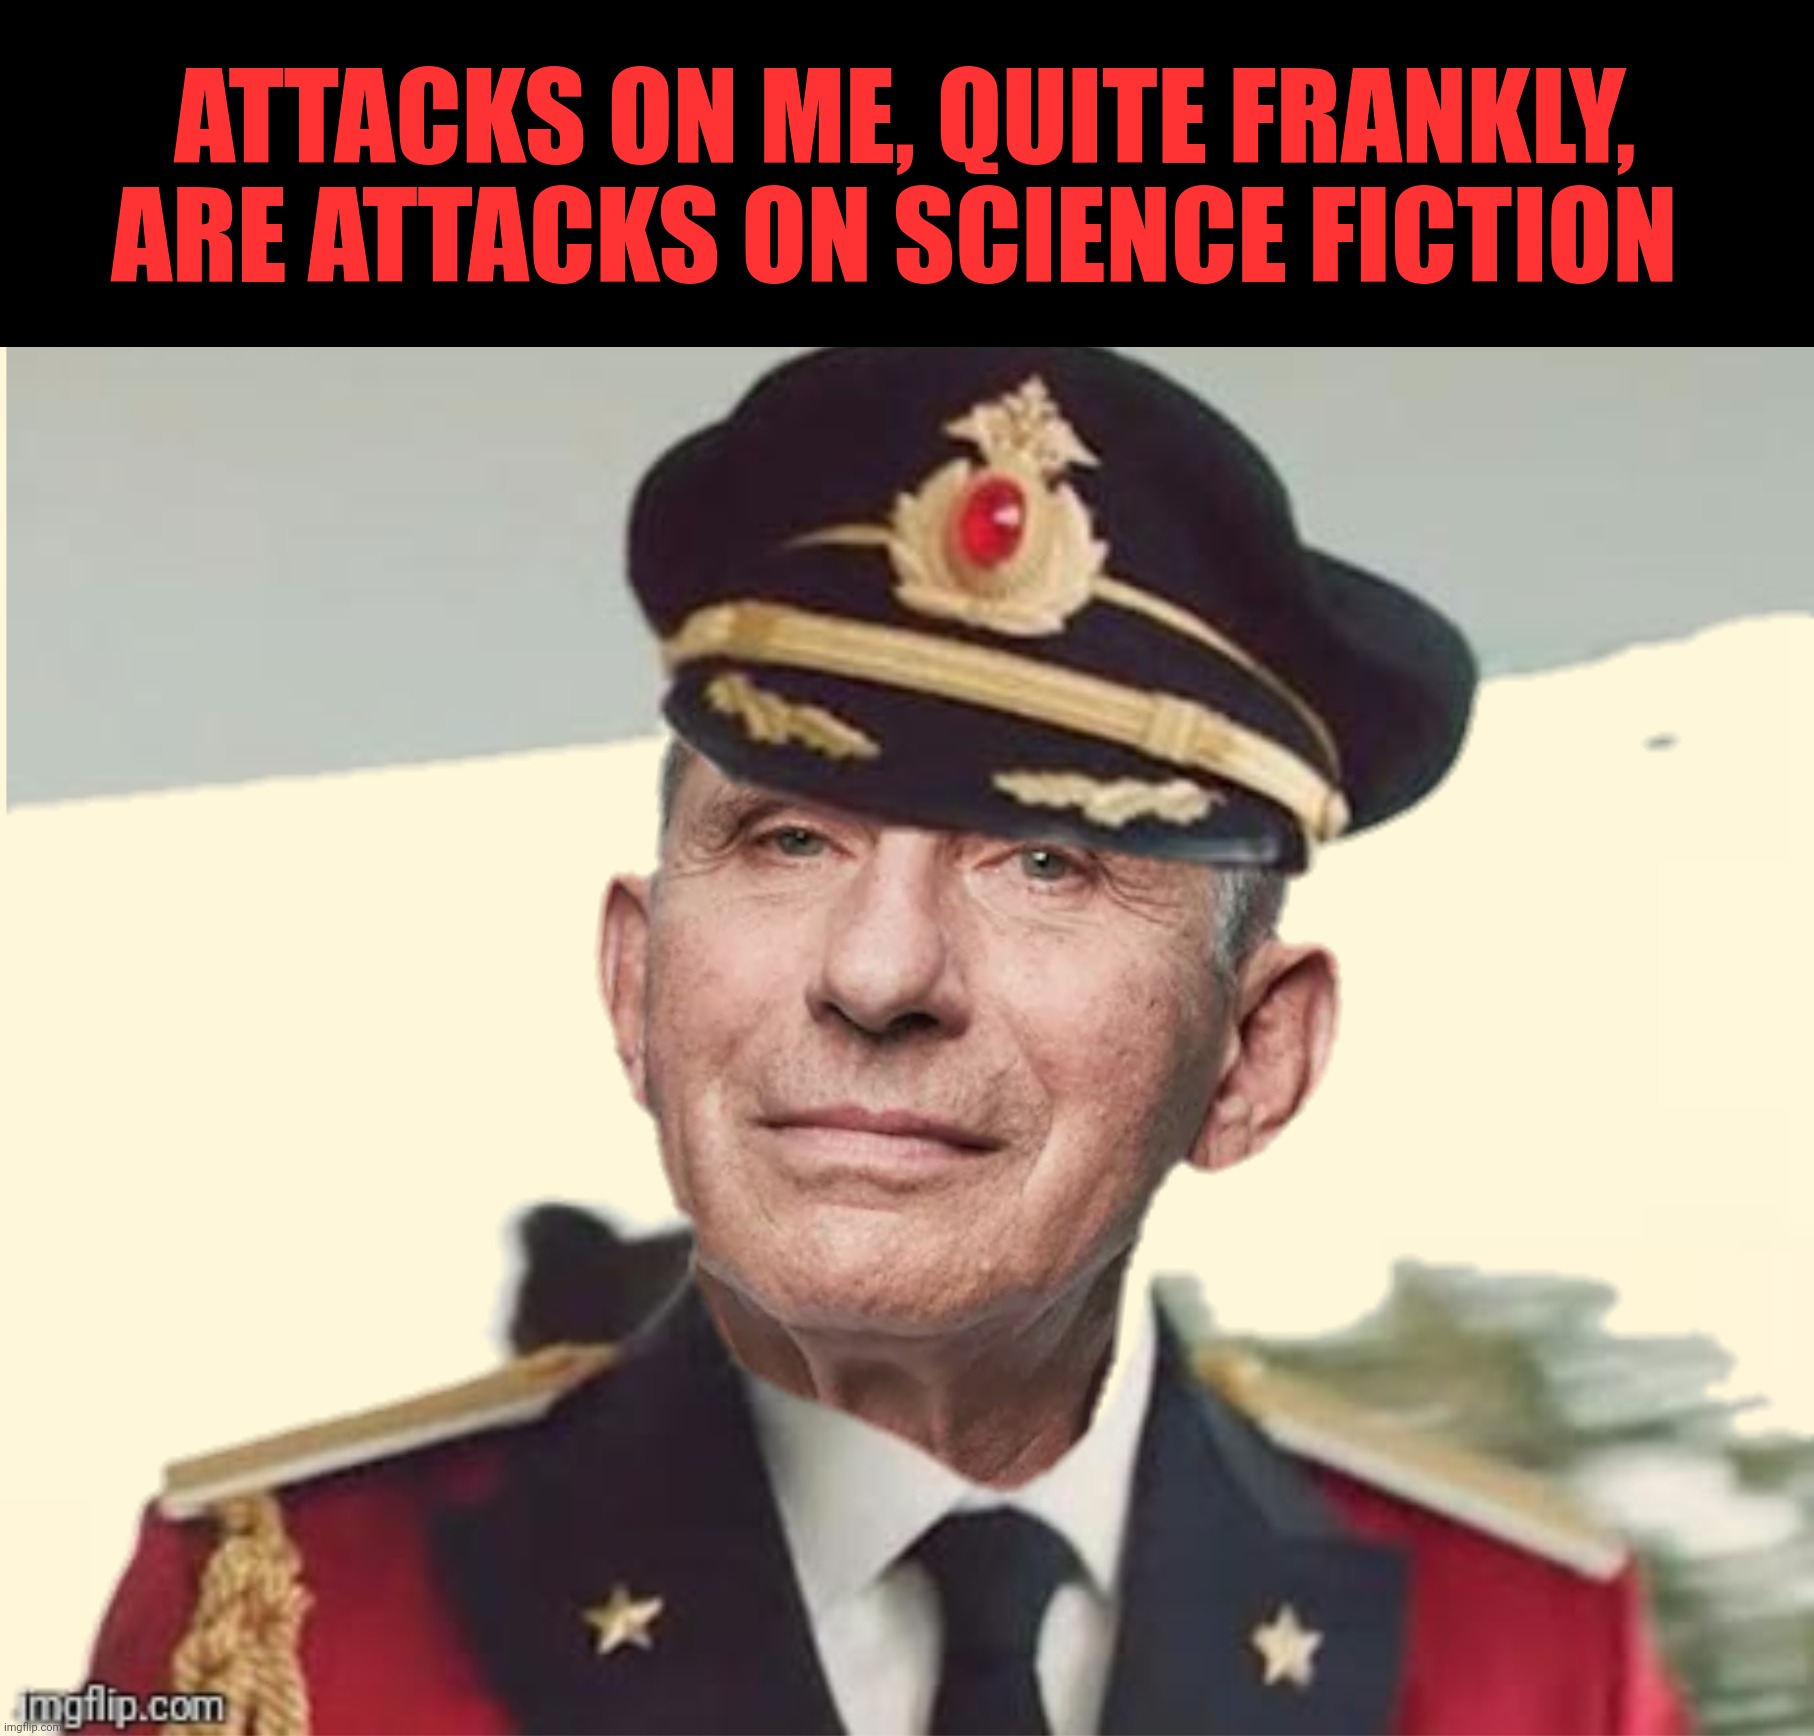 Dr. Frankly Obvious |  ATTACKS ON ME, QUITE FRANKLY, ARE ATTACKS ON SCIENCE FICTION | image tagged in bad photoshop,anthony fauci,captain obvious,science fiction | made w/ Imgflip meme maker